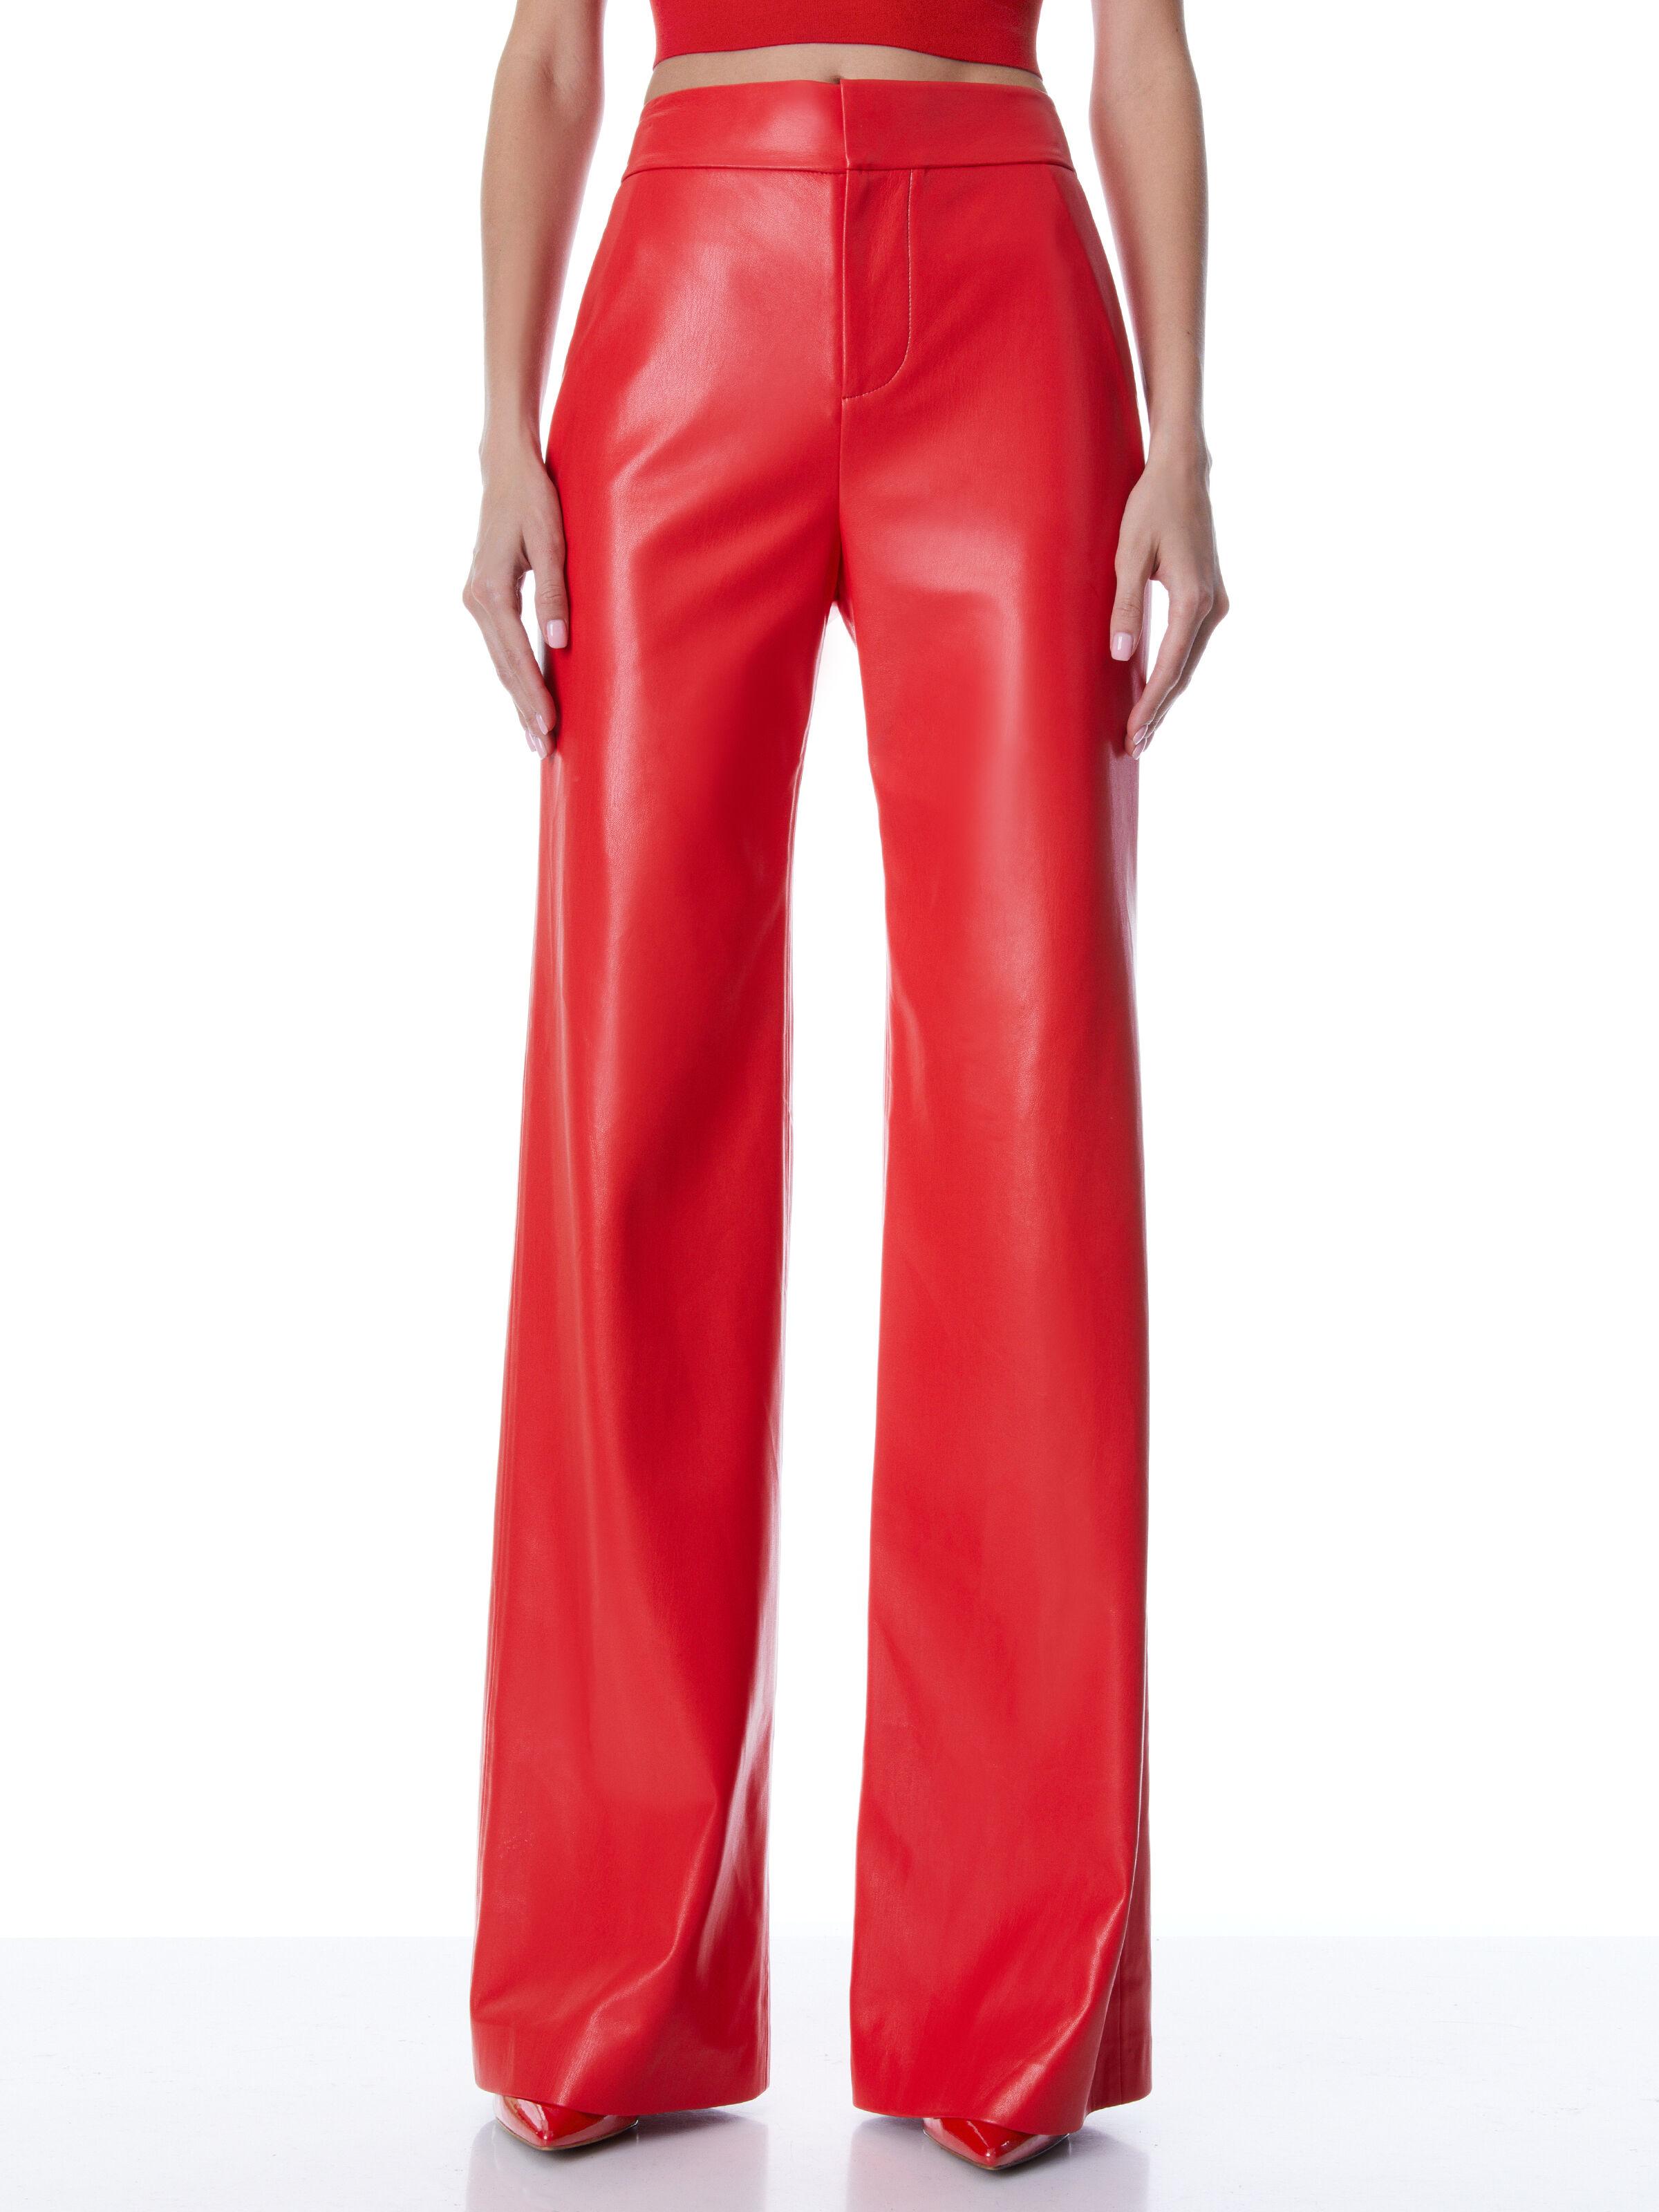 Alice + Olivia Deanna High Waisted Vegan Leather Bootcut Pant in